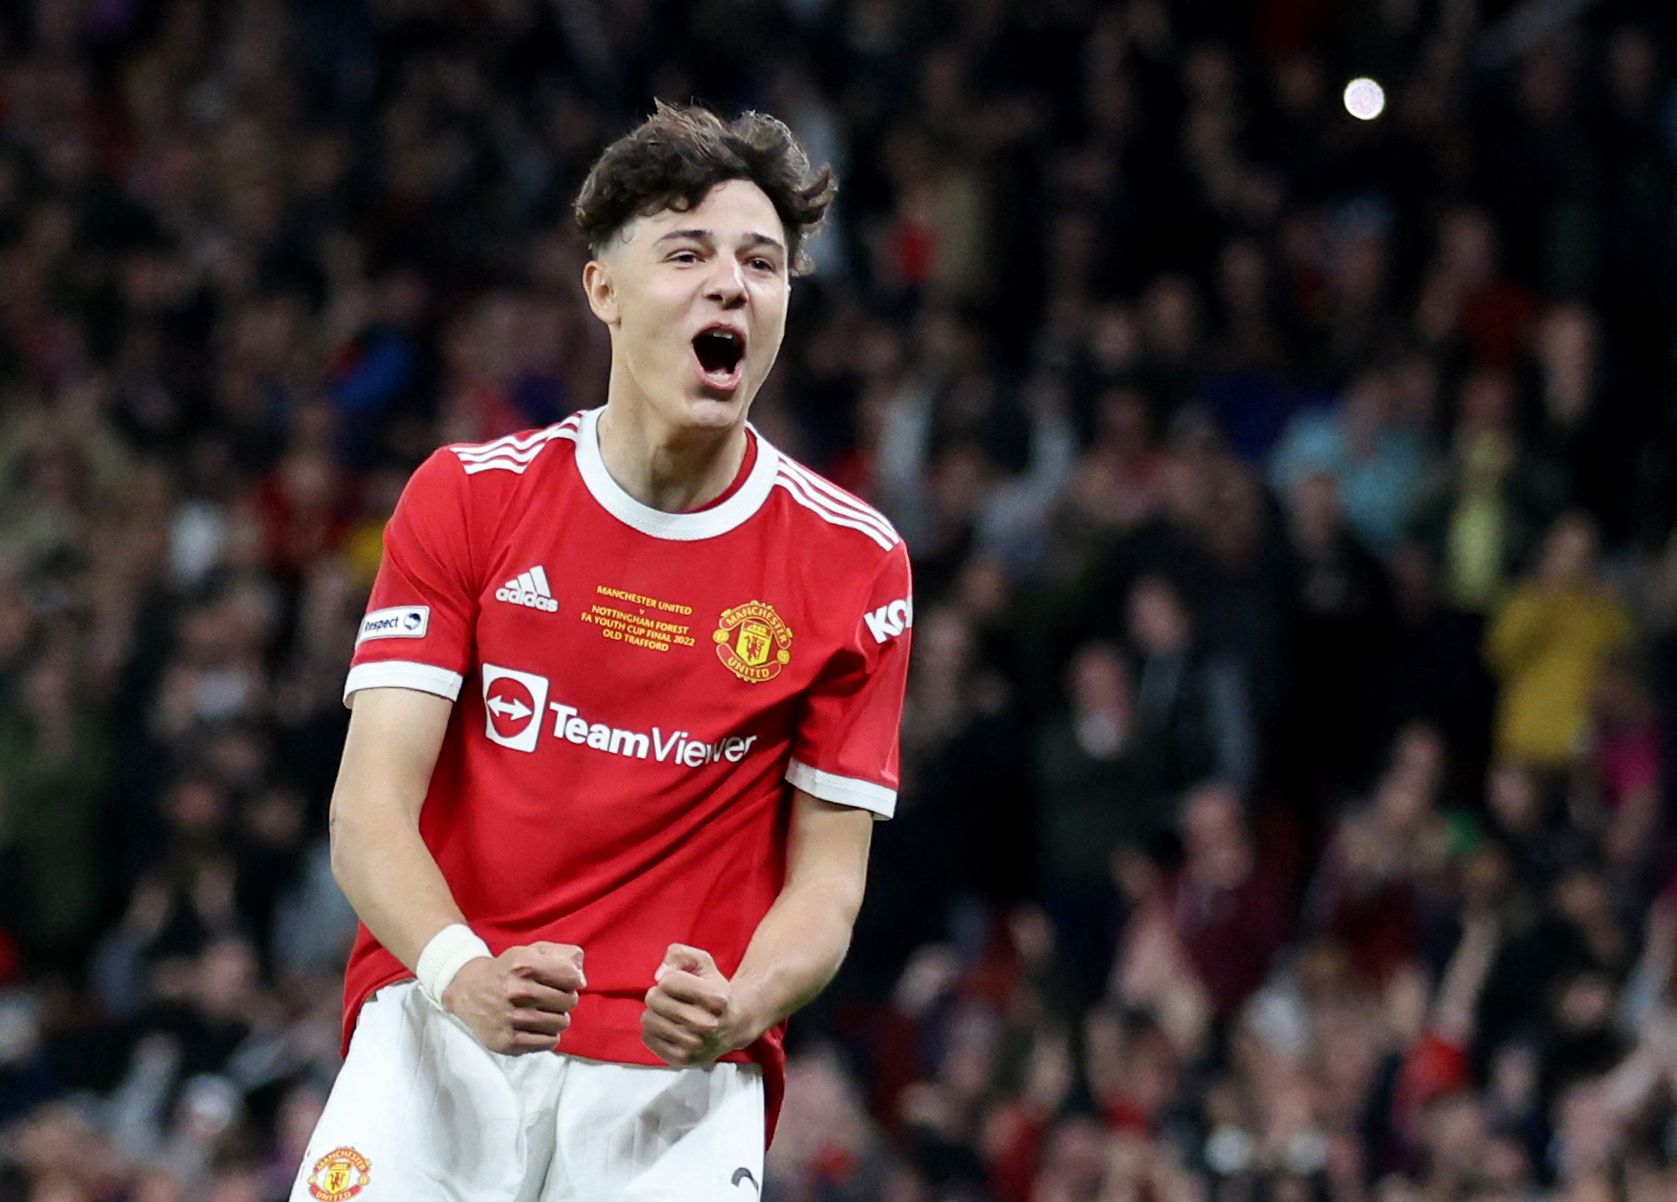 Soccer Football - FA Youth Cup Final - Manchester United v Nottingham Forest - Old Trafford, Manchester, Britain - May 11, 2022 Manchester United's Marc Jurado celebrates their third goal scored by Alejandro Garnacho Action Images/Carl Recine